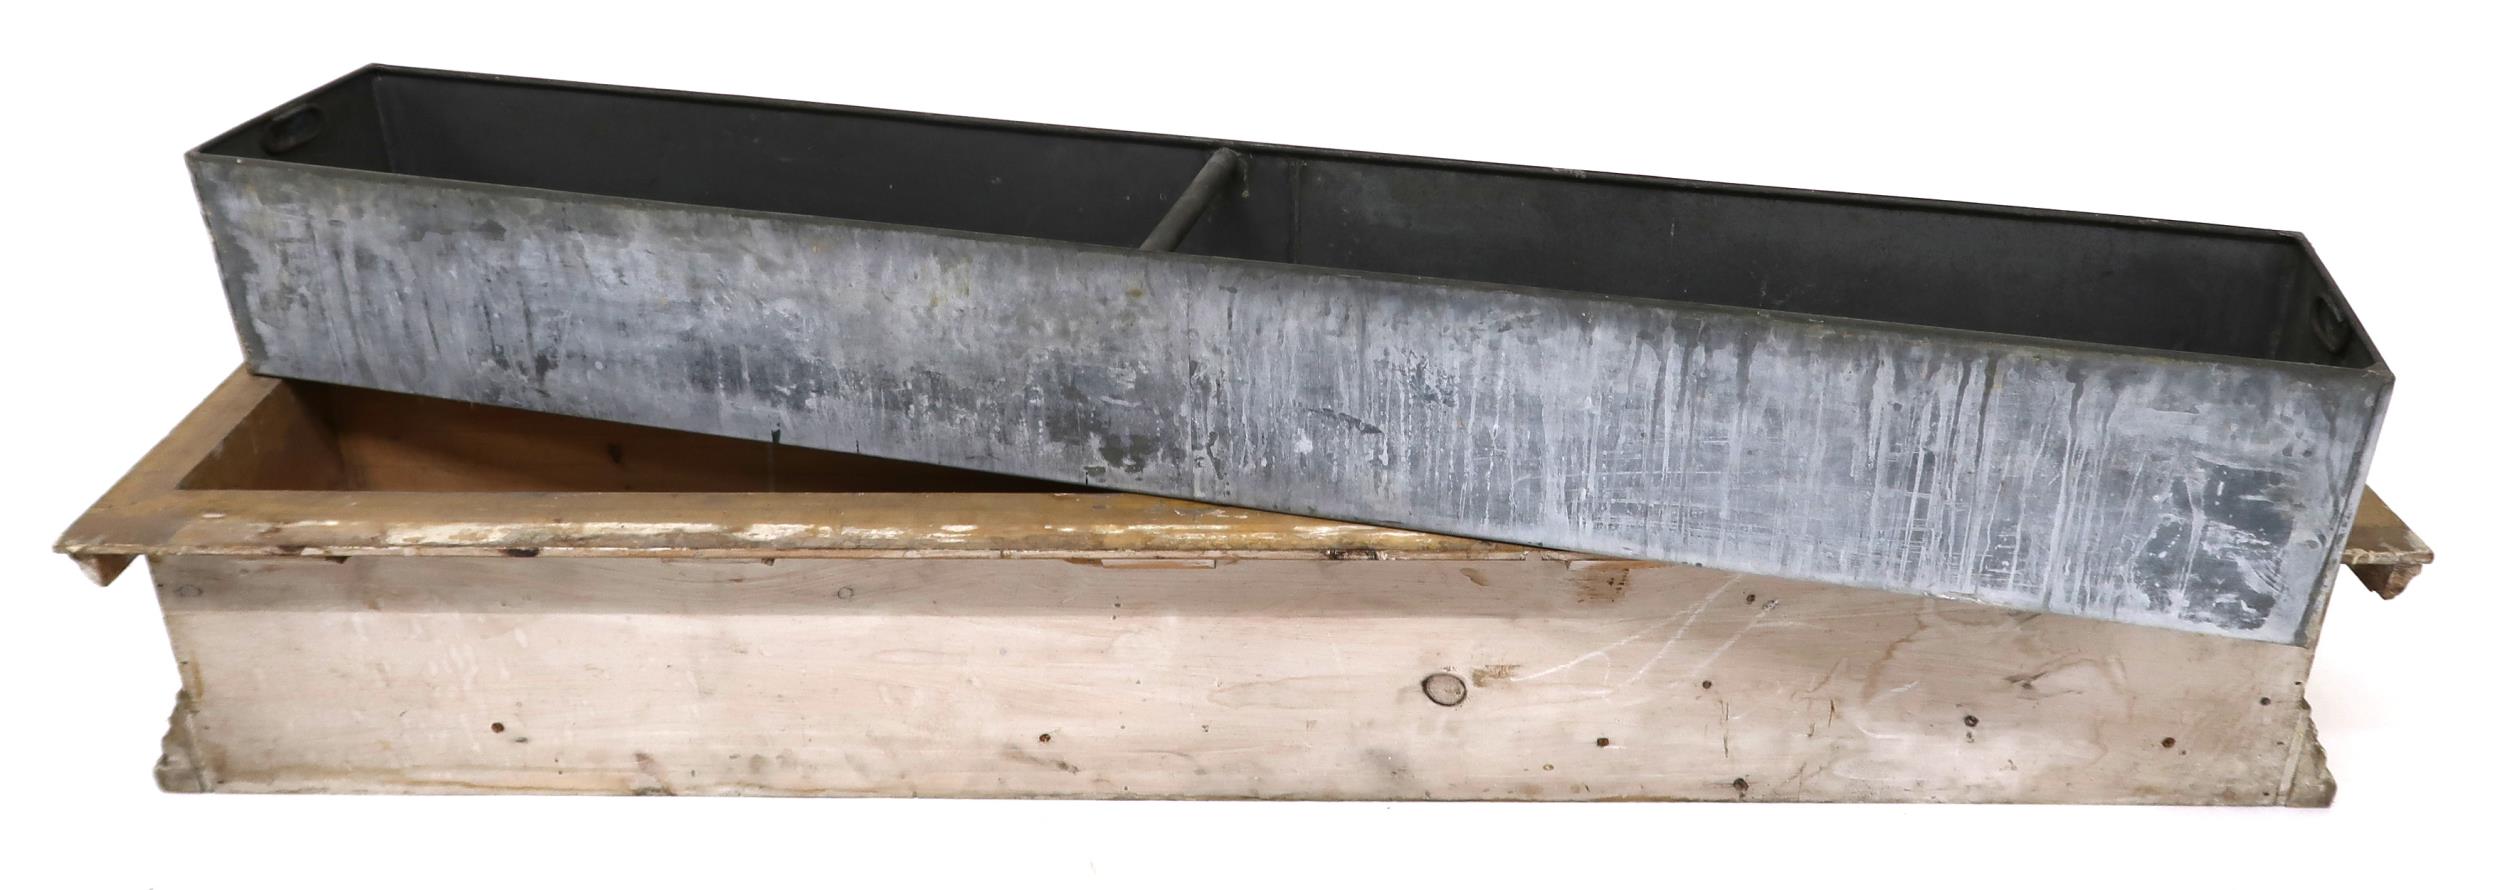 A LARGE 19TH CENTURY PINE GILT GESSO PLANT TROUGH  with moulded cornice over central scrolled - Image 11 of 11